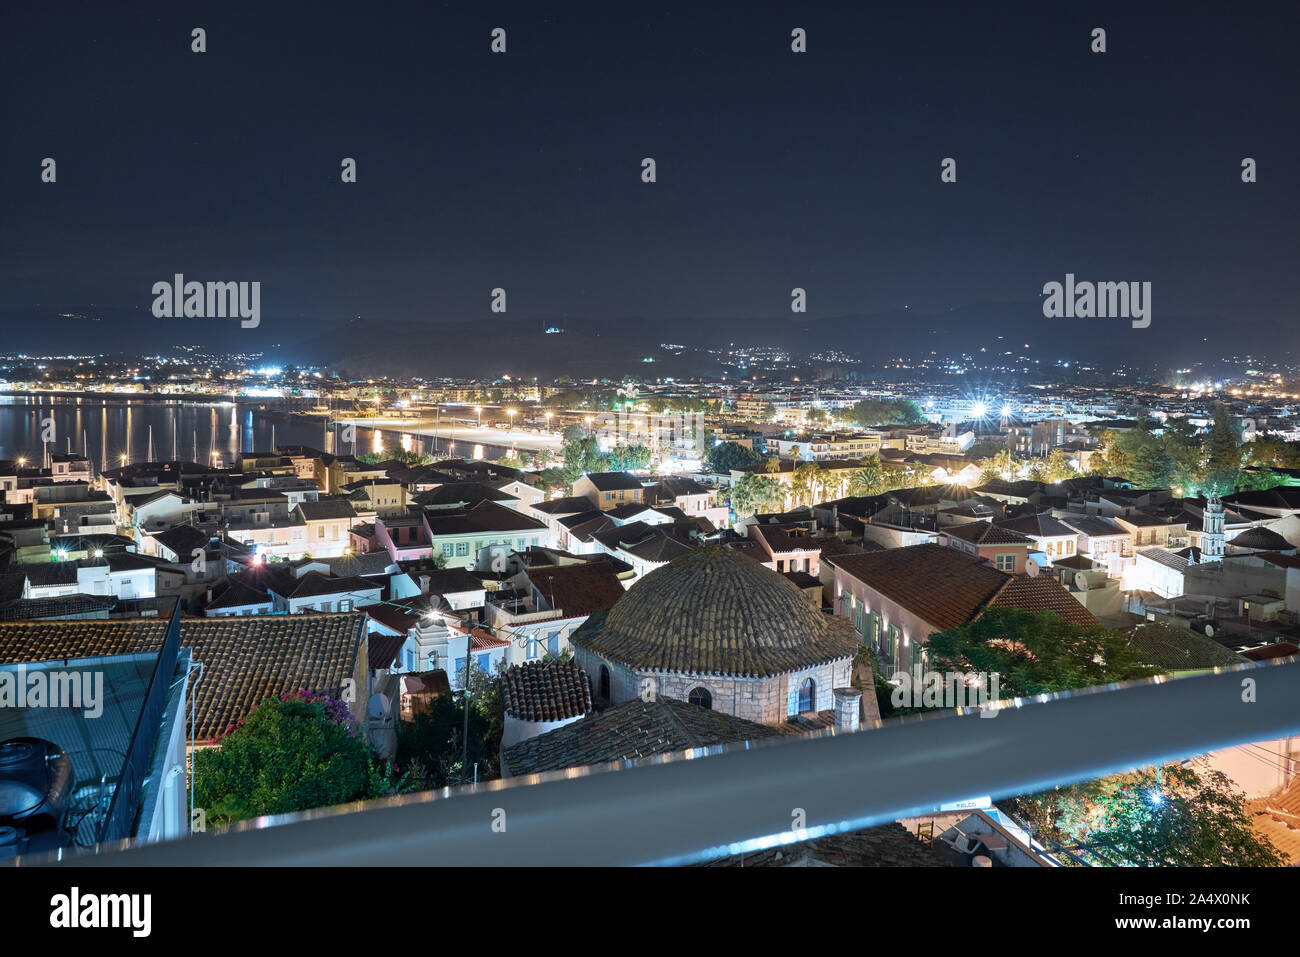 View over the city of Nafplio, Greece by night Stock Photo